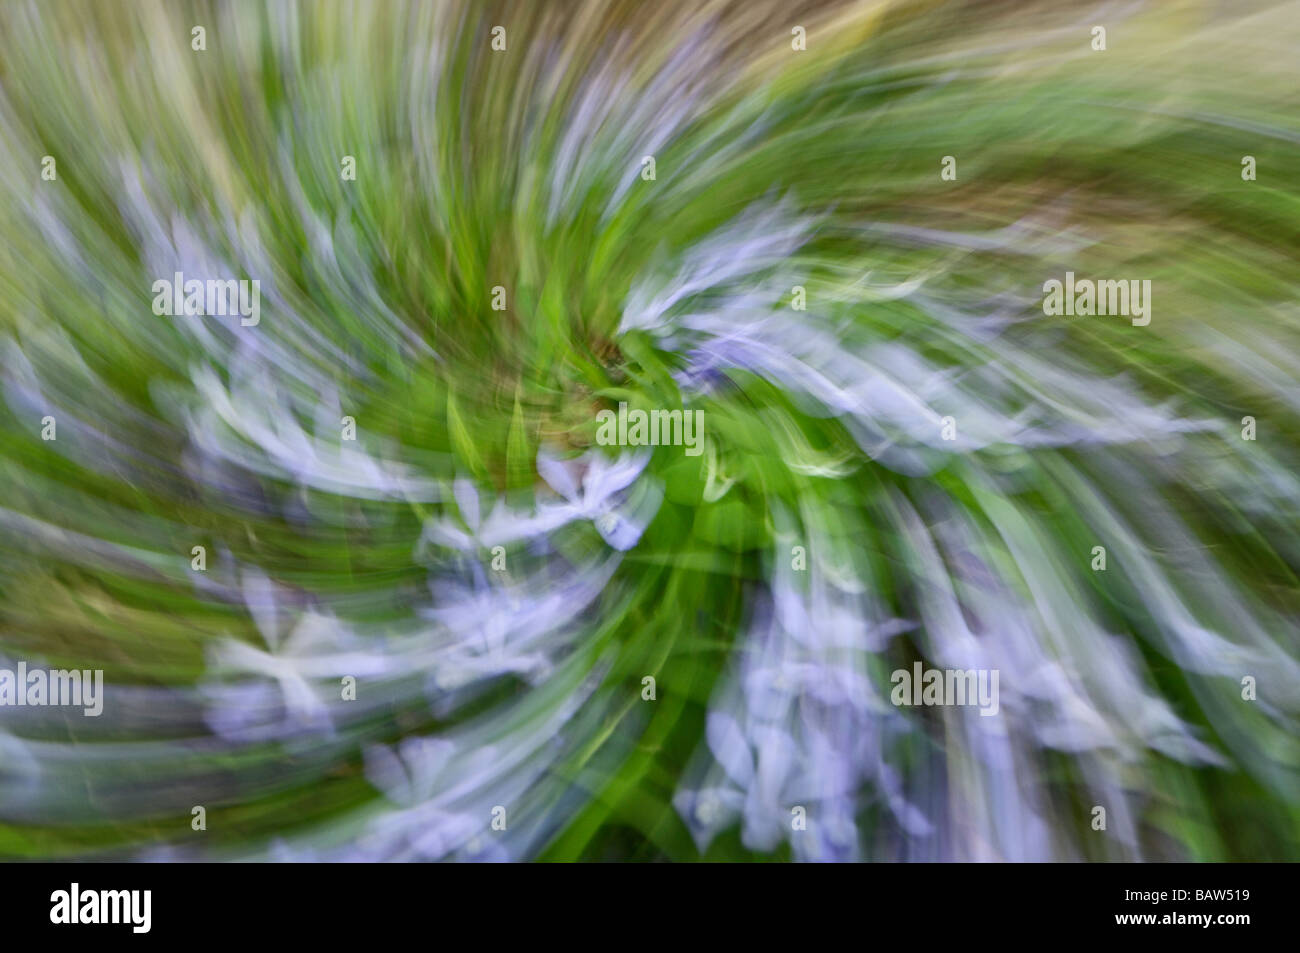 Abstract Zoom Blur Photo of Crested Dwarf Iris in Great Smoky Mountains National Park Tennessee Stock Photo